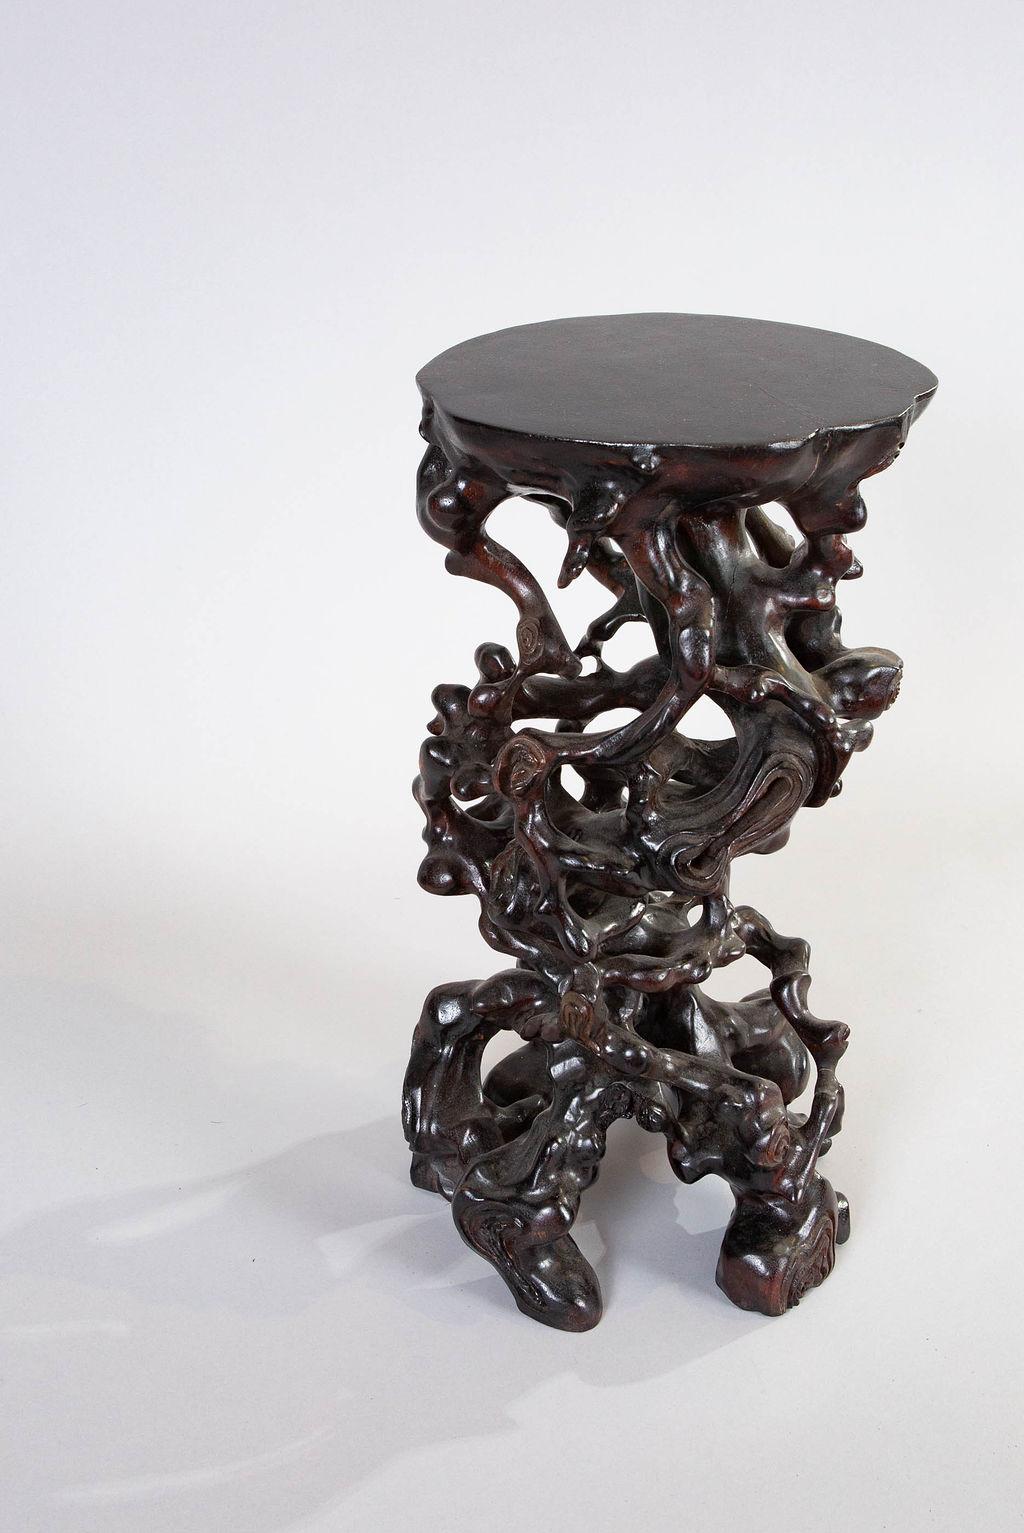 Antique Japanese root stand, Meiji period (1868-1912) presentation stand, hand carved from a single piece of wood, made to imitate natural roots. For presenting a sculpture or treasure.